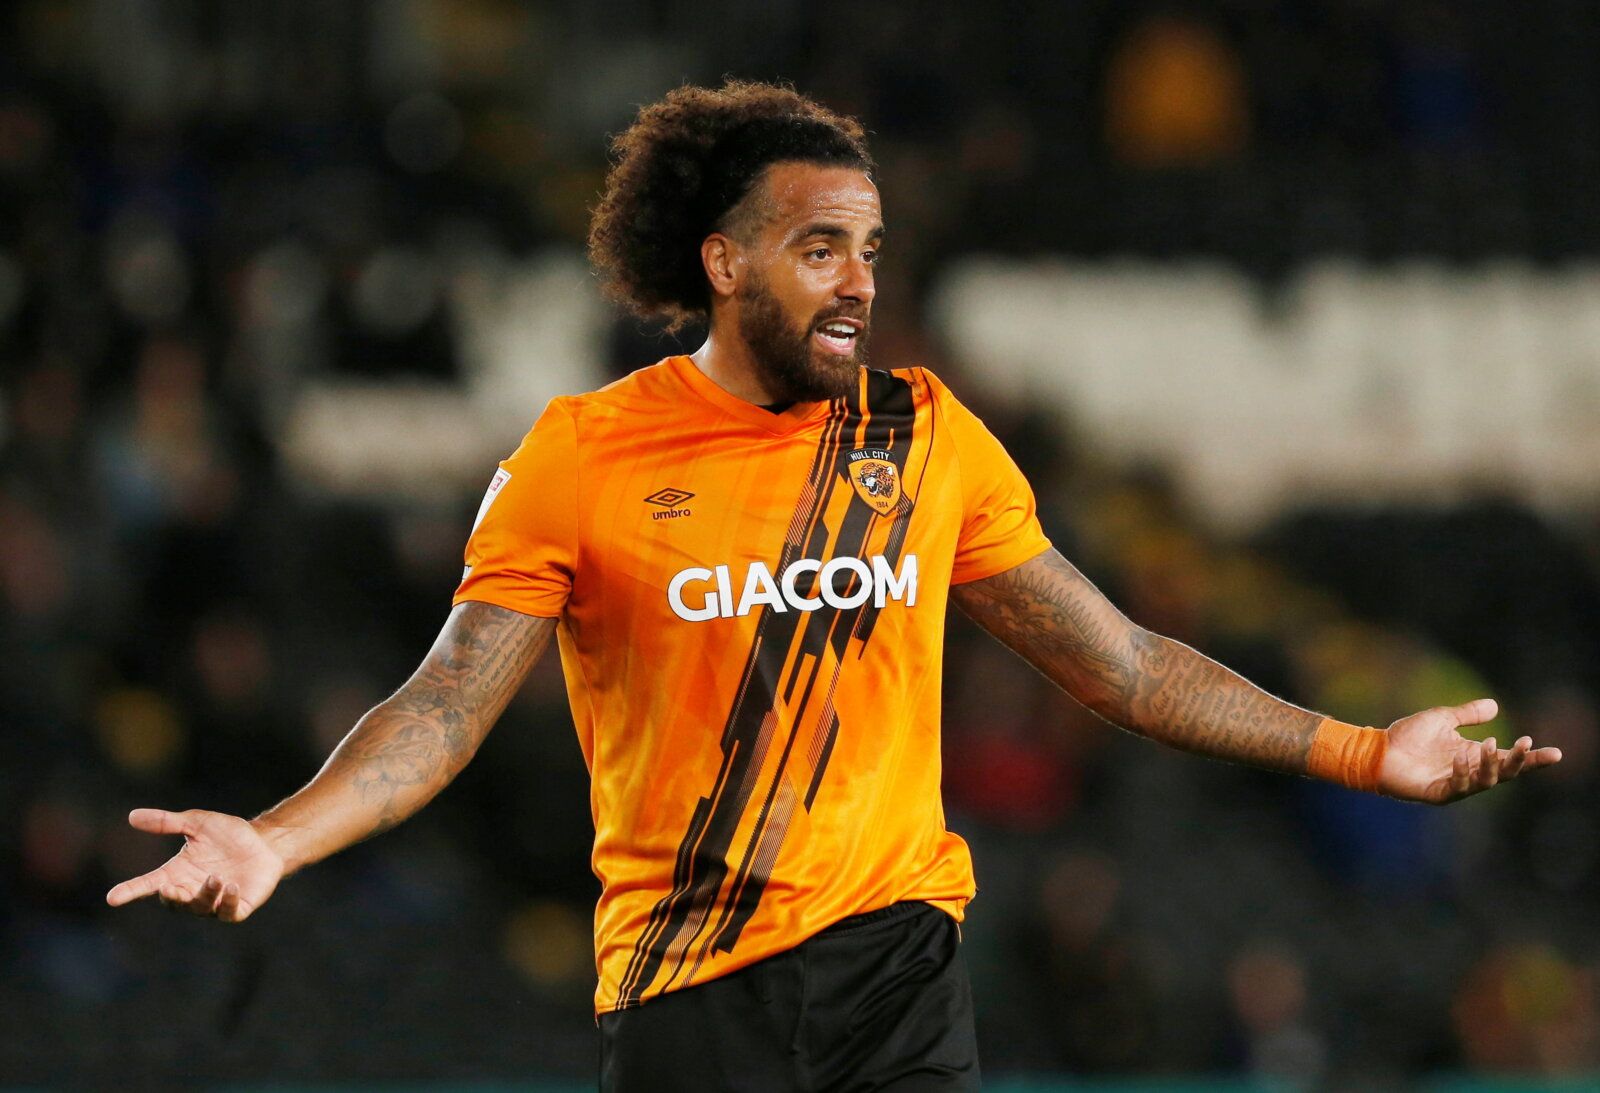 Soccer Football - Championship - Hull City v Peterborough United - KCOM Stadium, Hull, Britain - October 20, 2021  Hull City's Tom Huddlestone reacts  Action Images/Craig Brough  EDITORIAL USE ONLY. No use with unauthorized audio, video, data, fixture lists, club/league logos or 